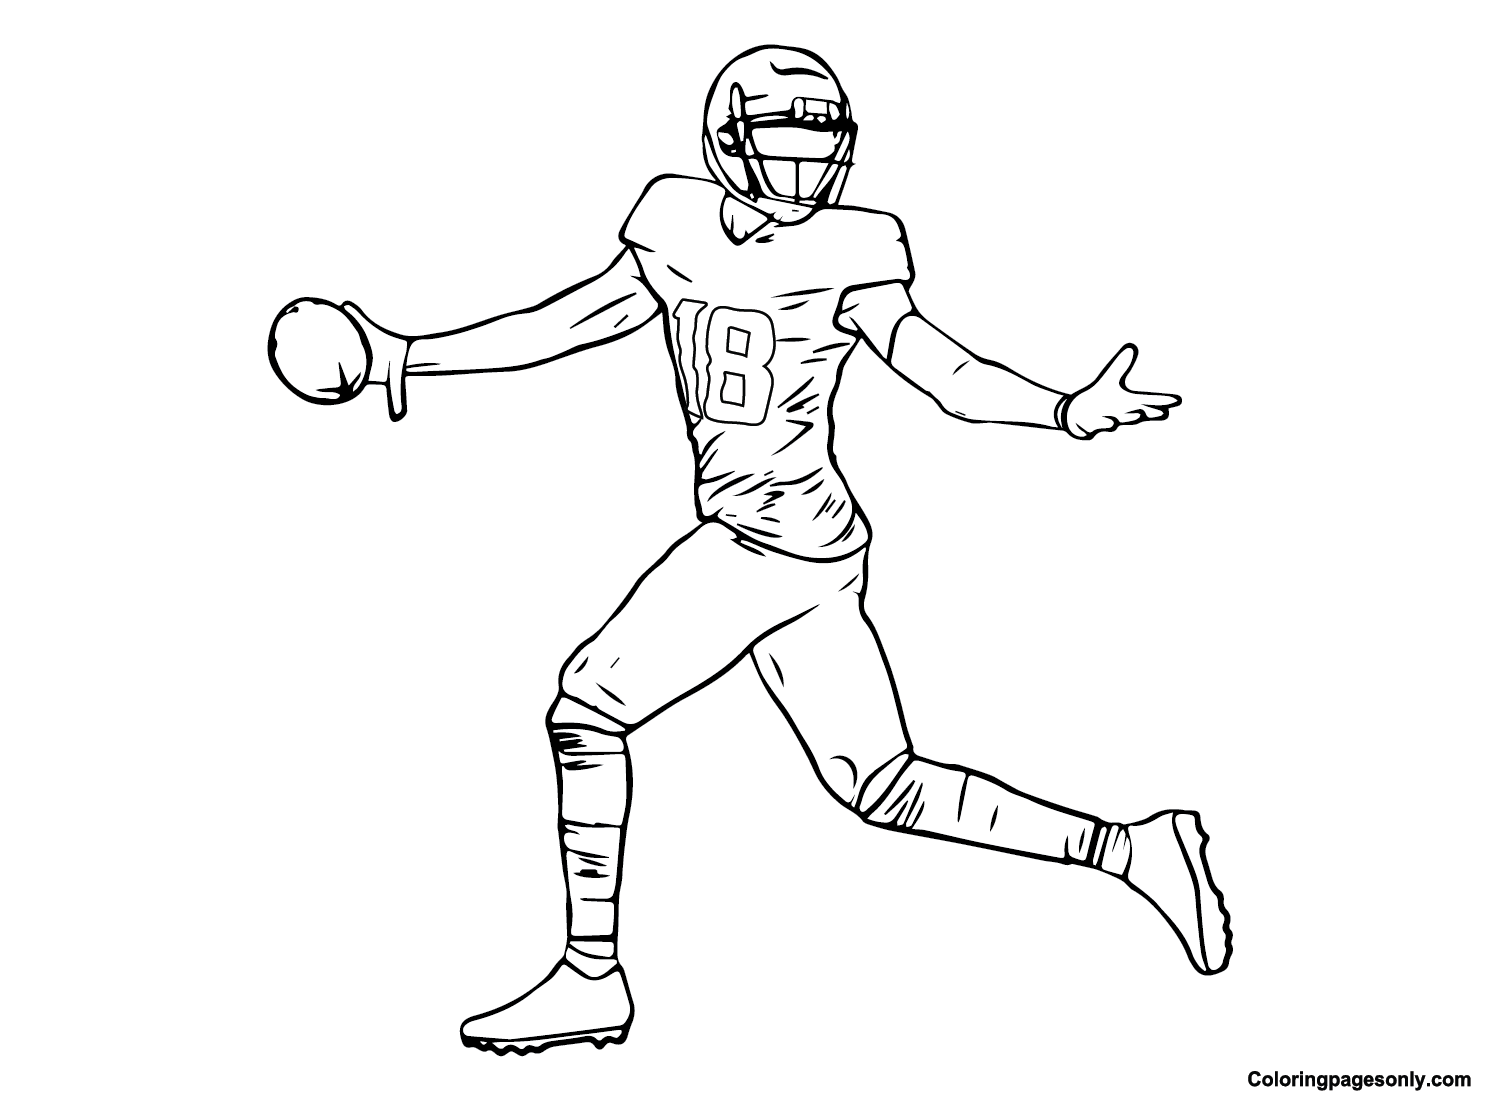 Printable Justin Jefferson Coloring Pages - Justin Jefferson Coloring Pages  - Coloring Pages For Kids And Adults